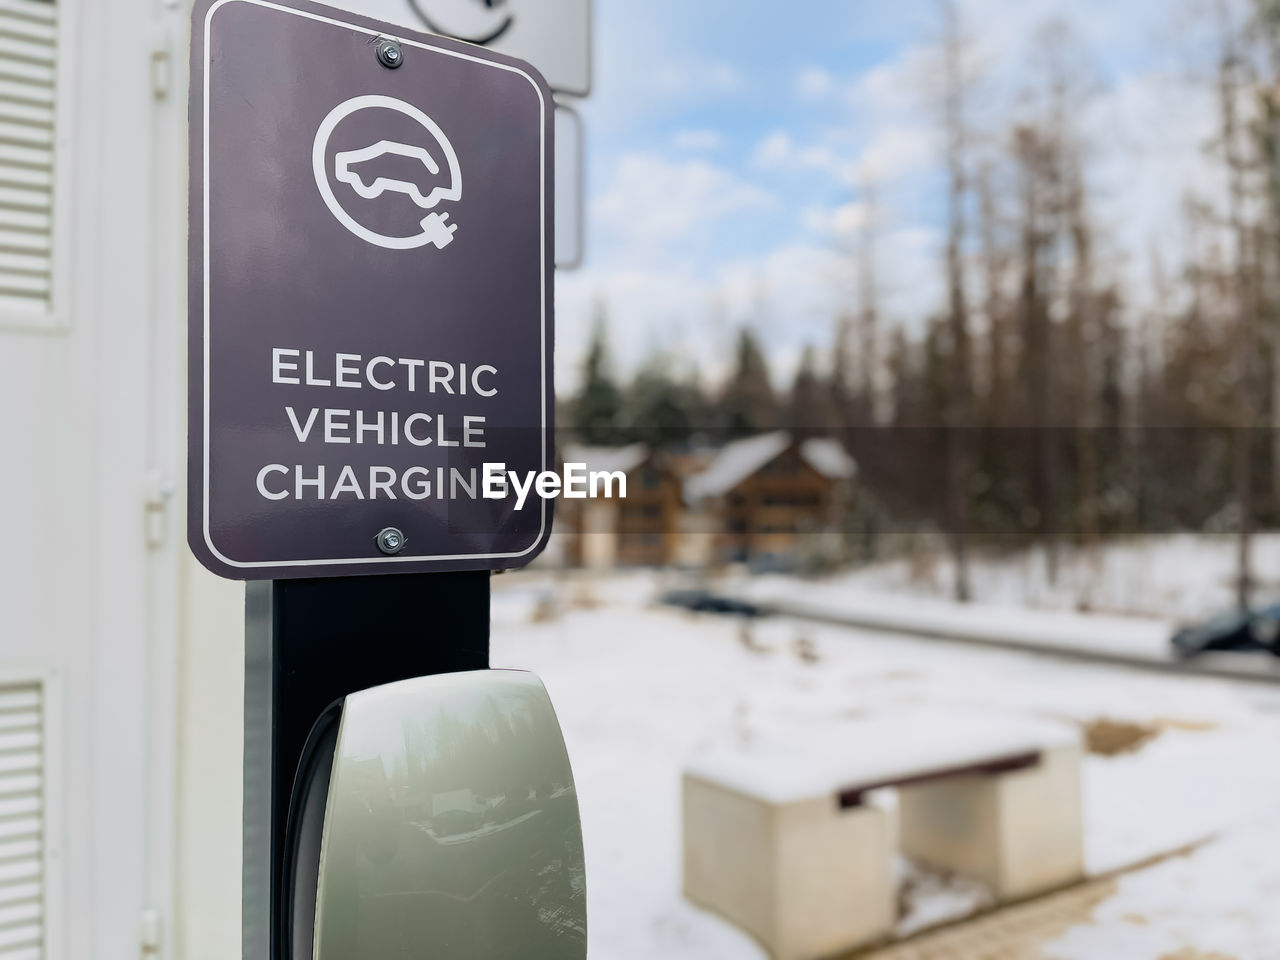 Electric vehicle charging station for powering electric cars on parking in a residential area. green